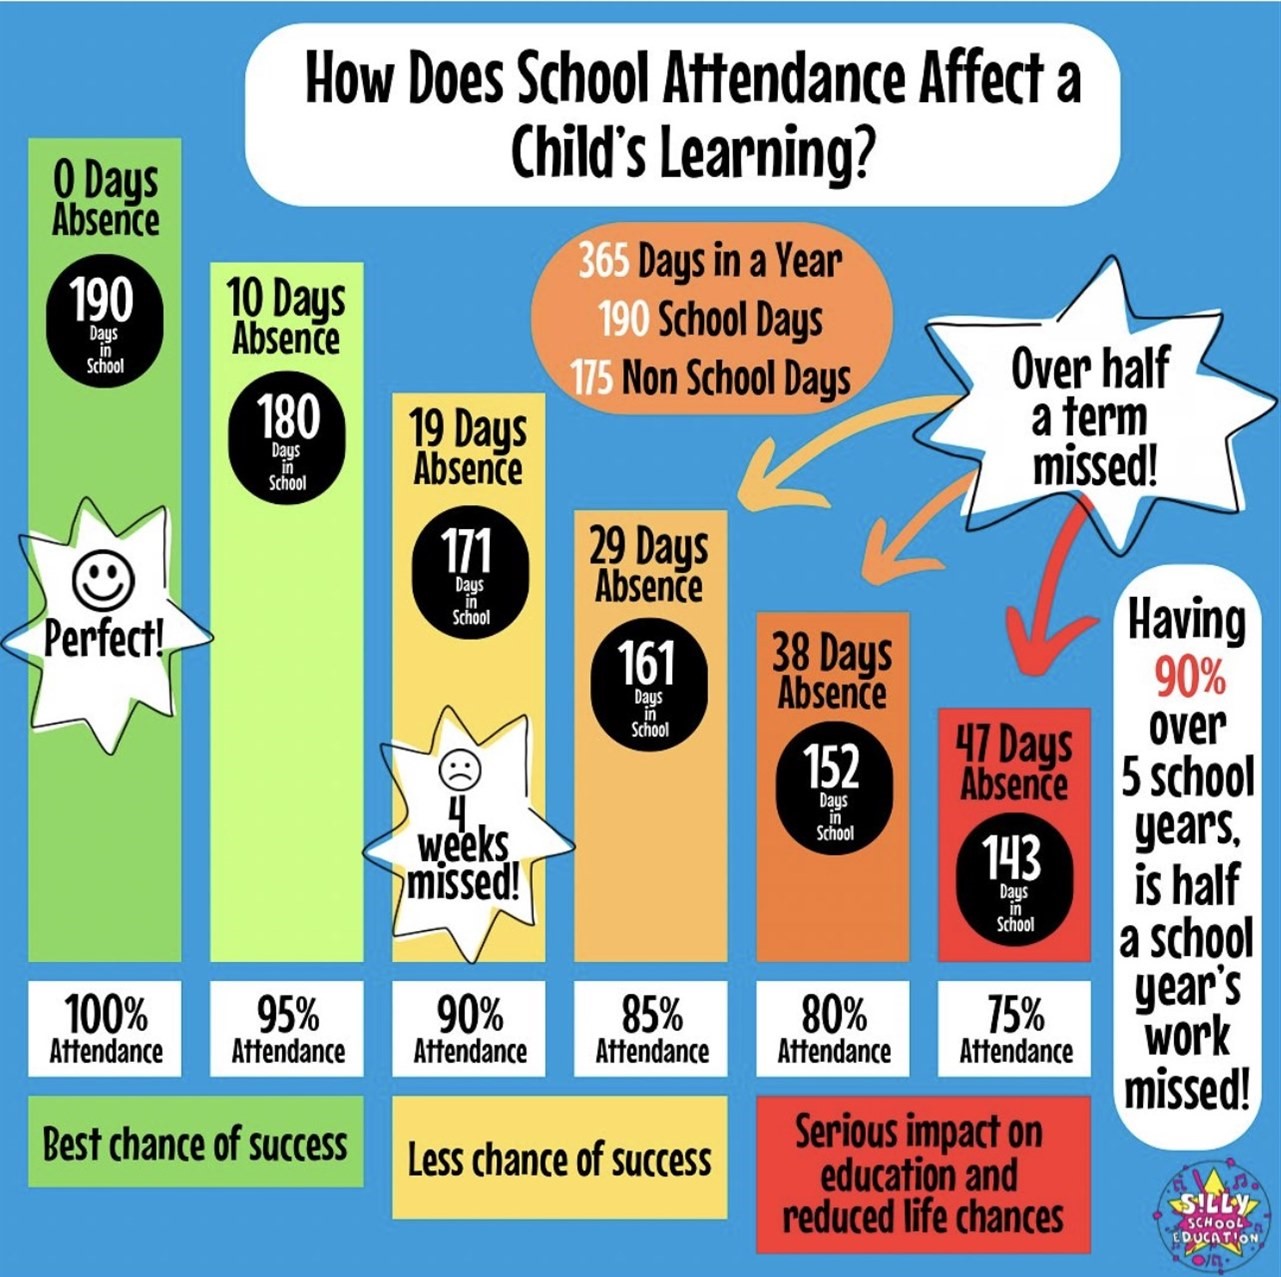 How Does School Attendance Affect a Child's Learning?